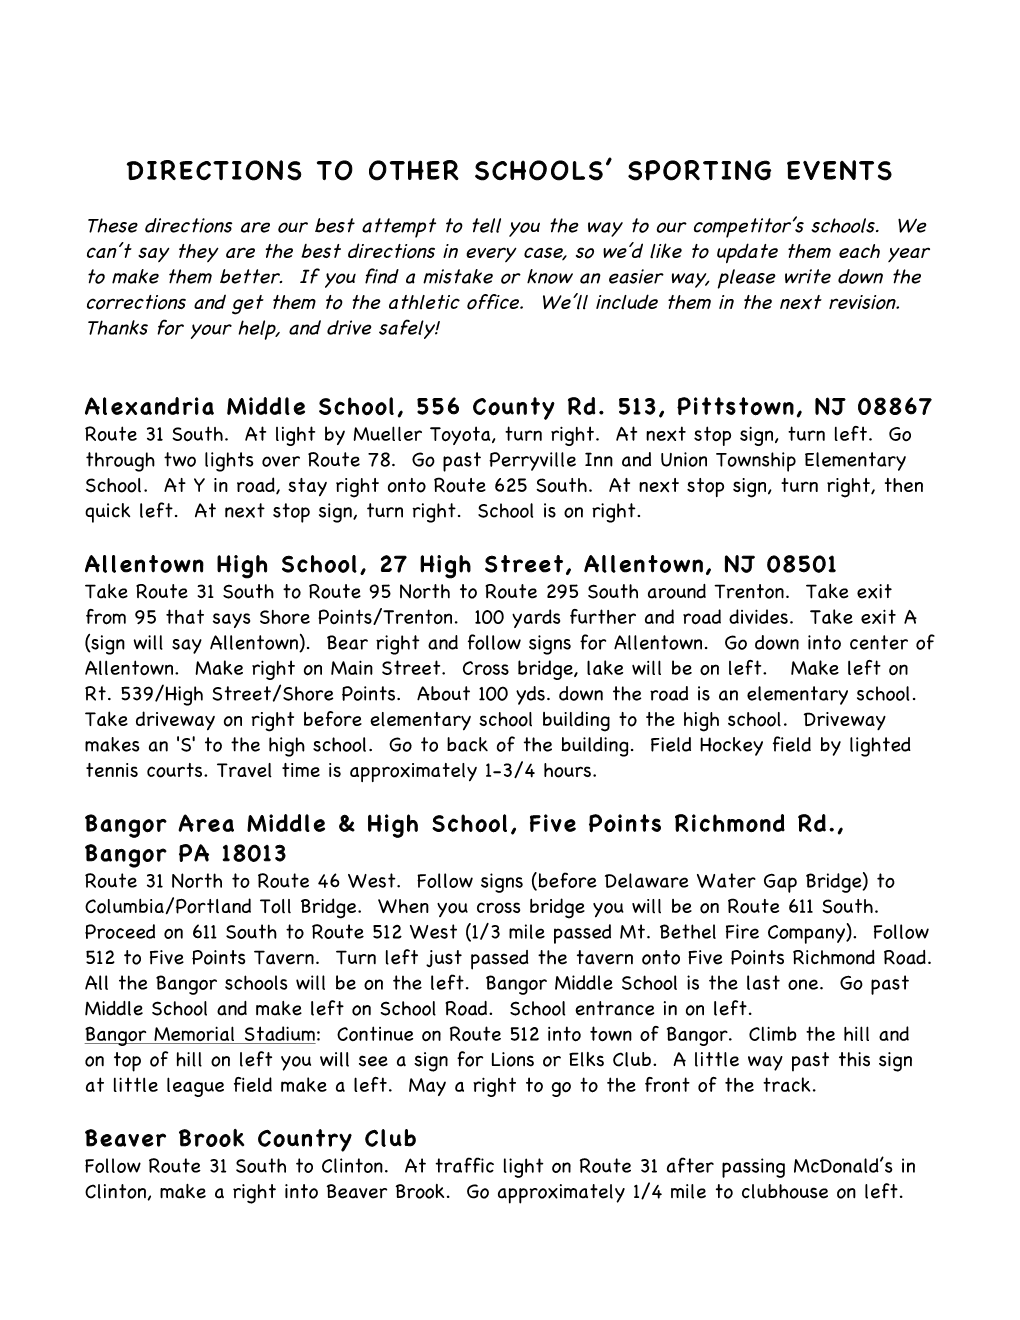 Directions to Other Schools' Sporting Events